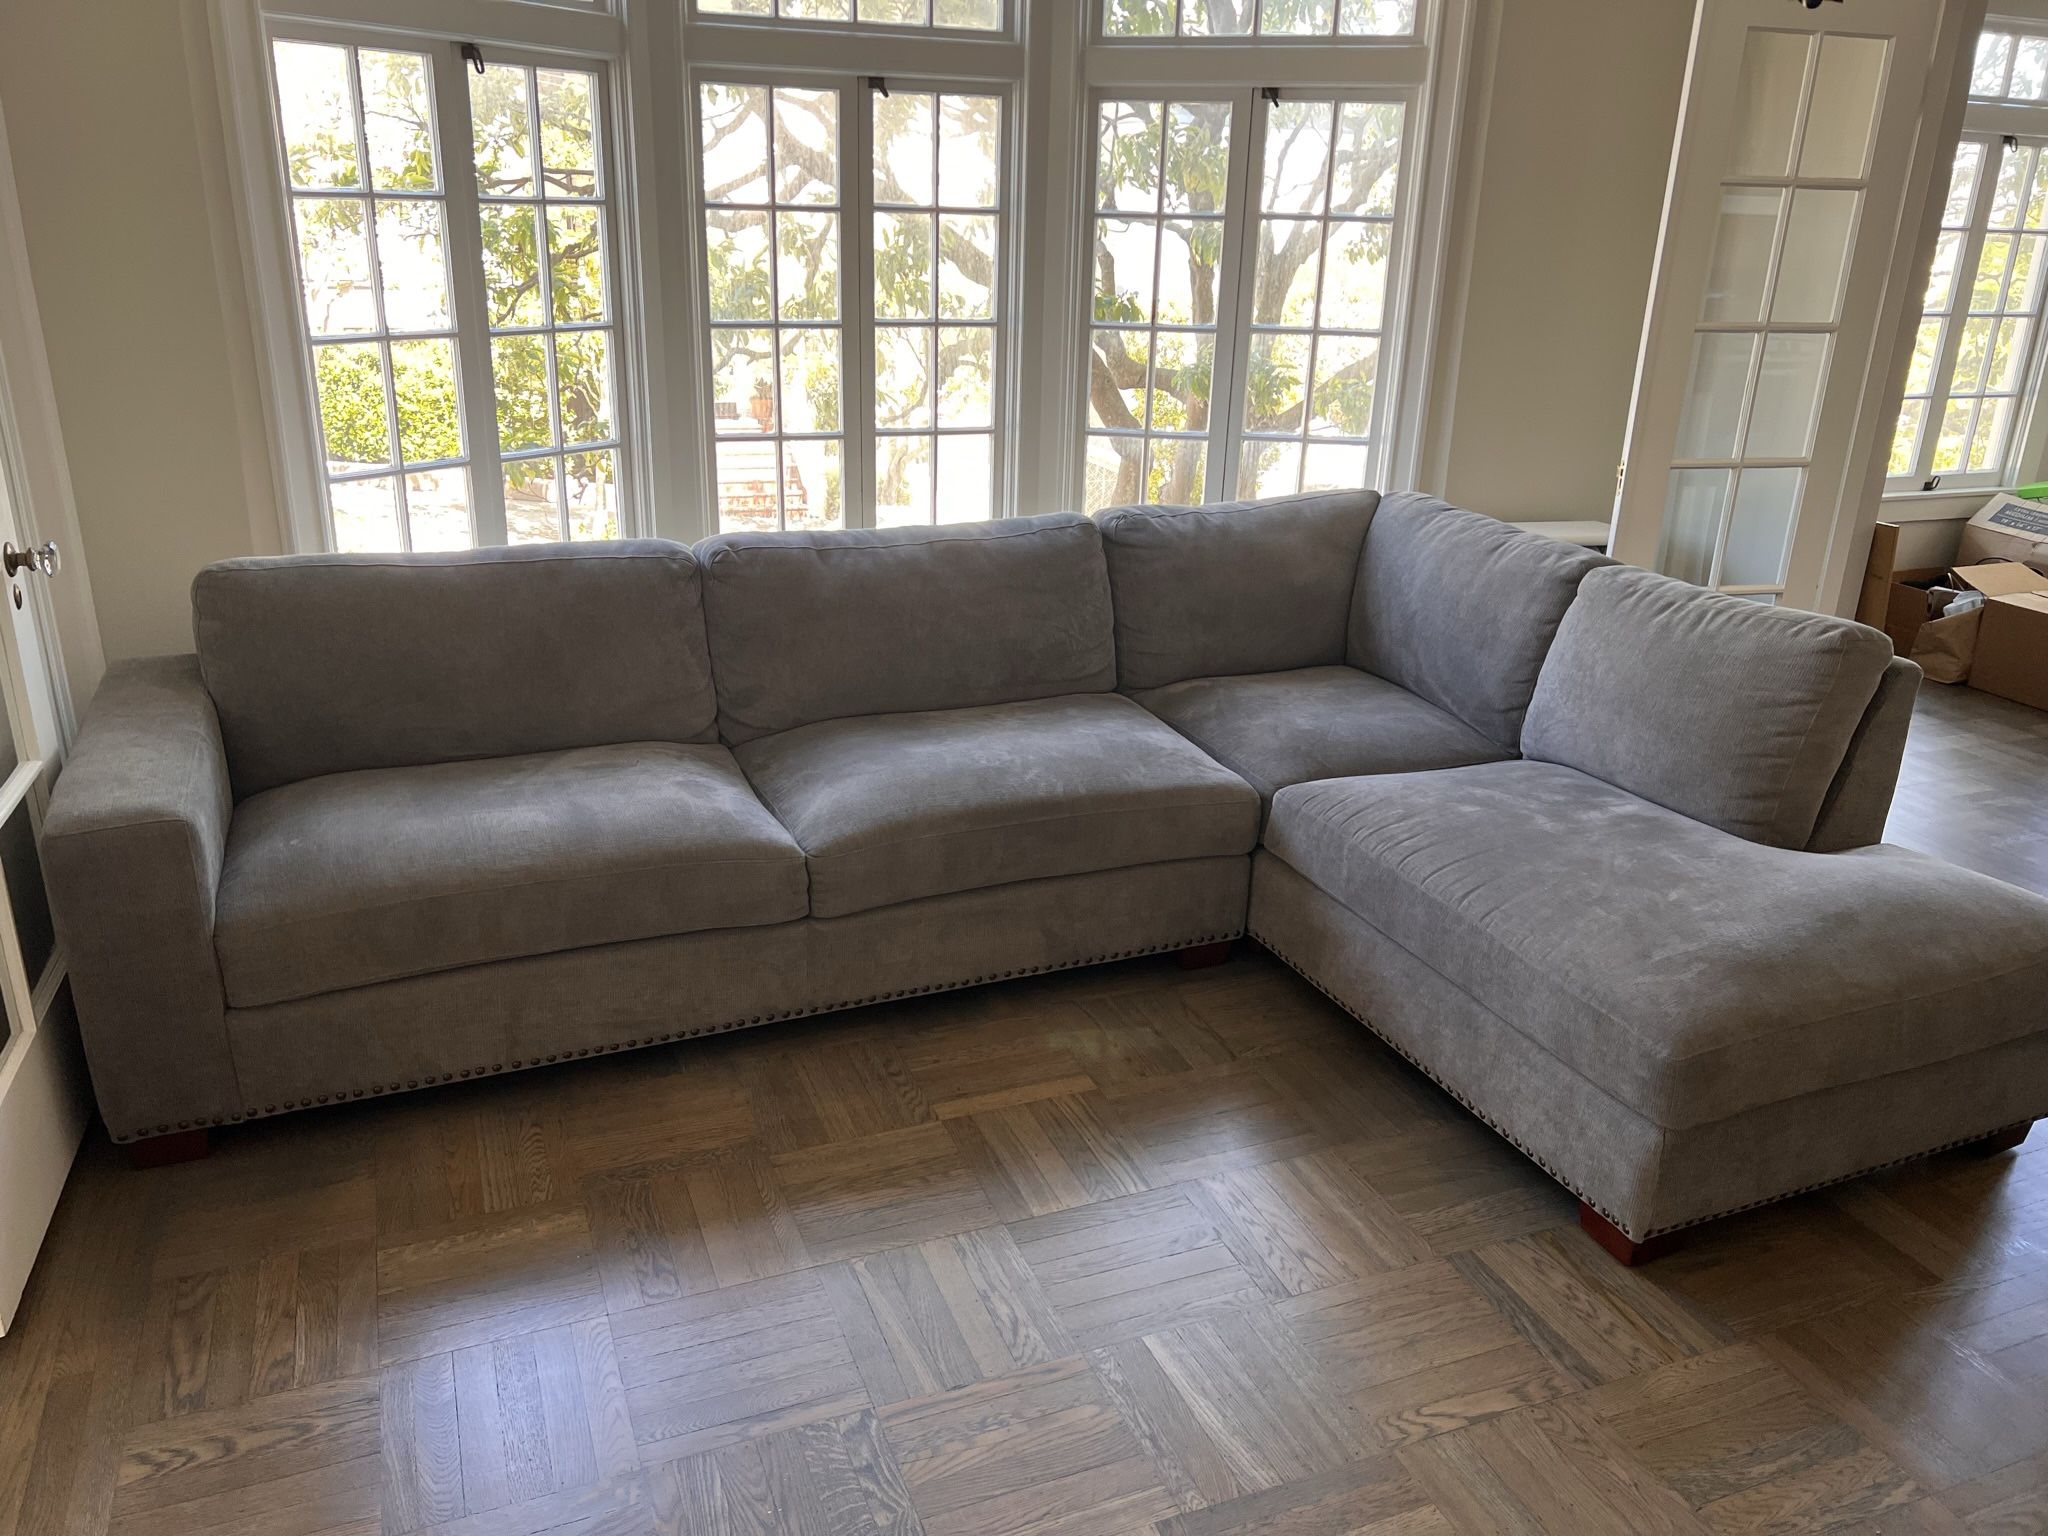 Sectional Couch With Ottoman For Free. Must provide your own movers and transportation. 